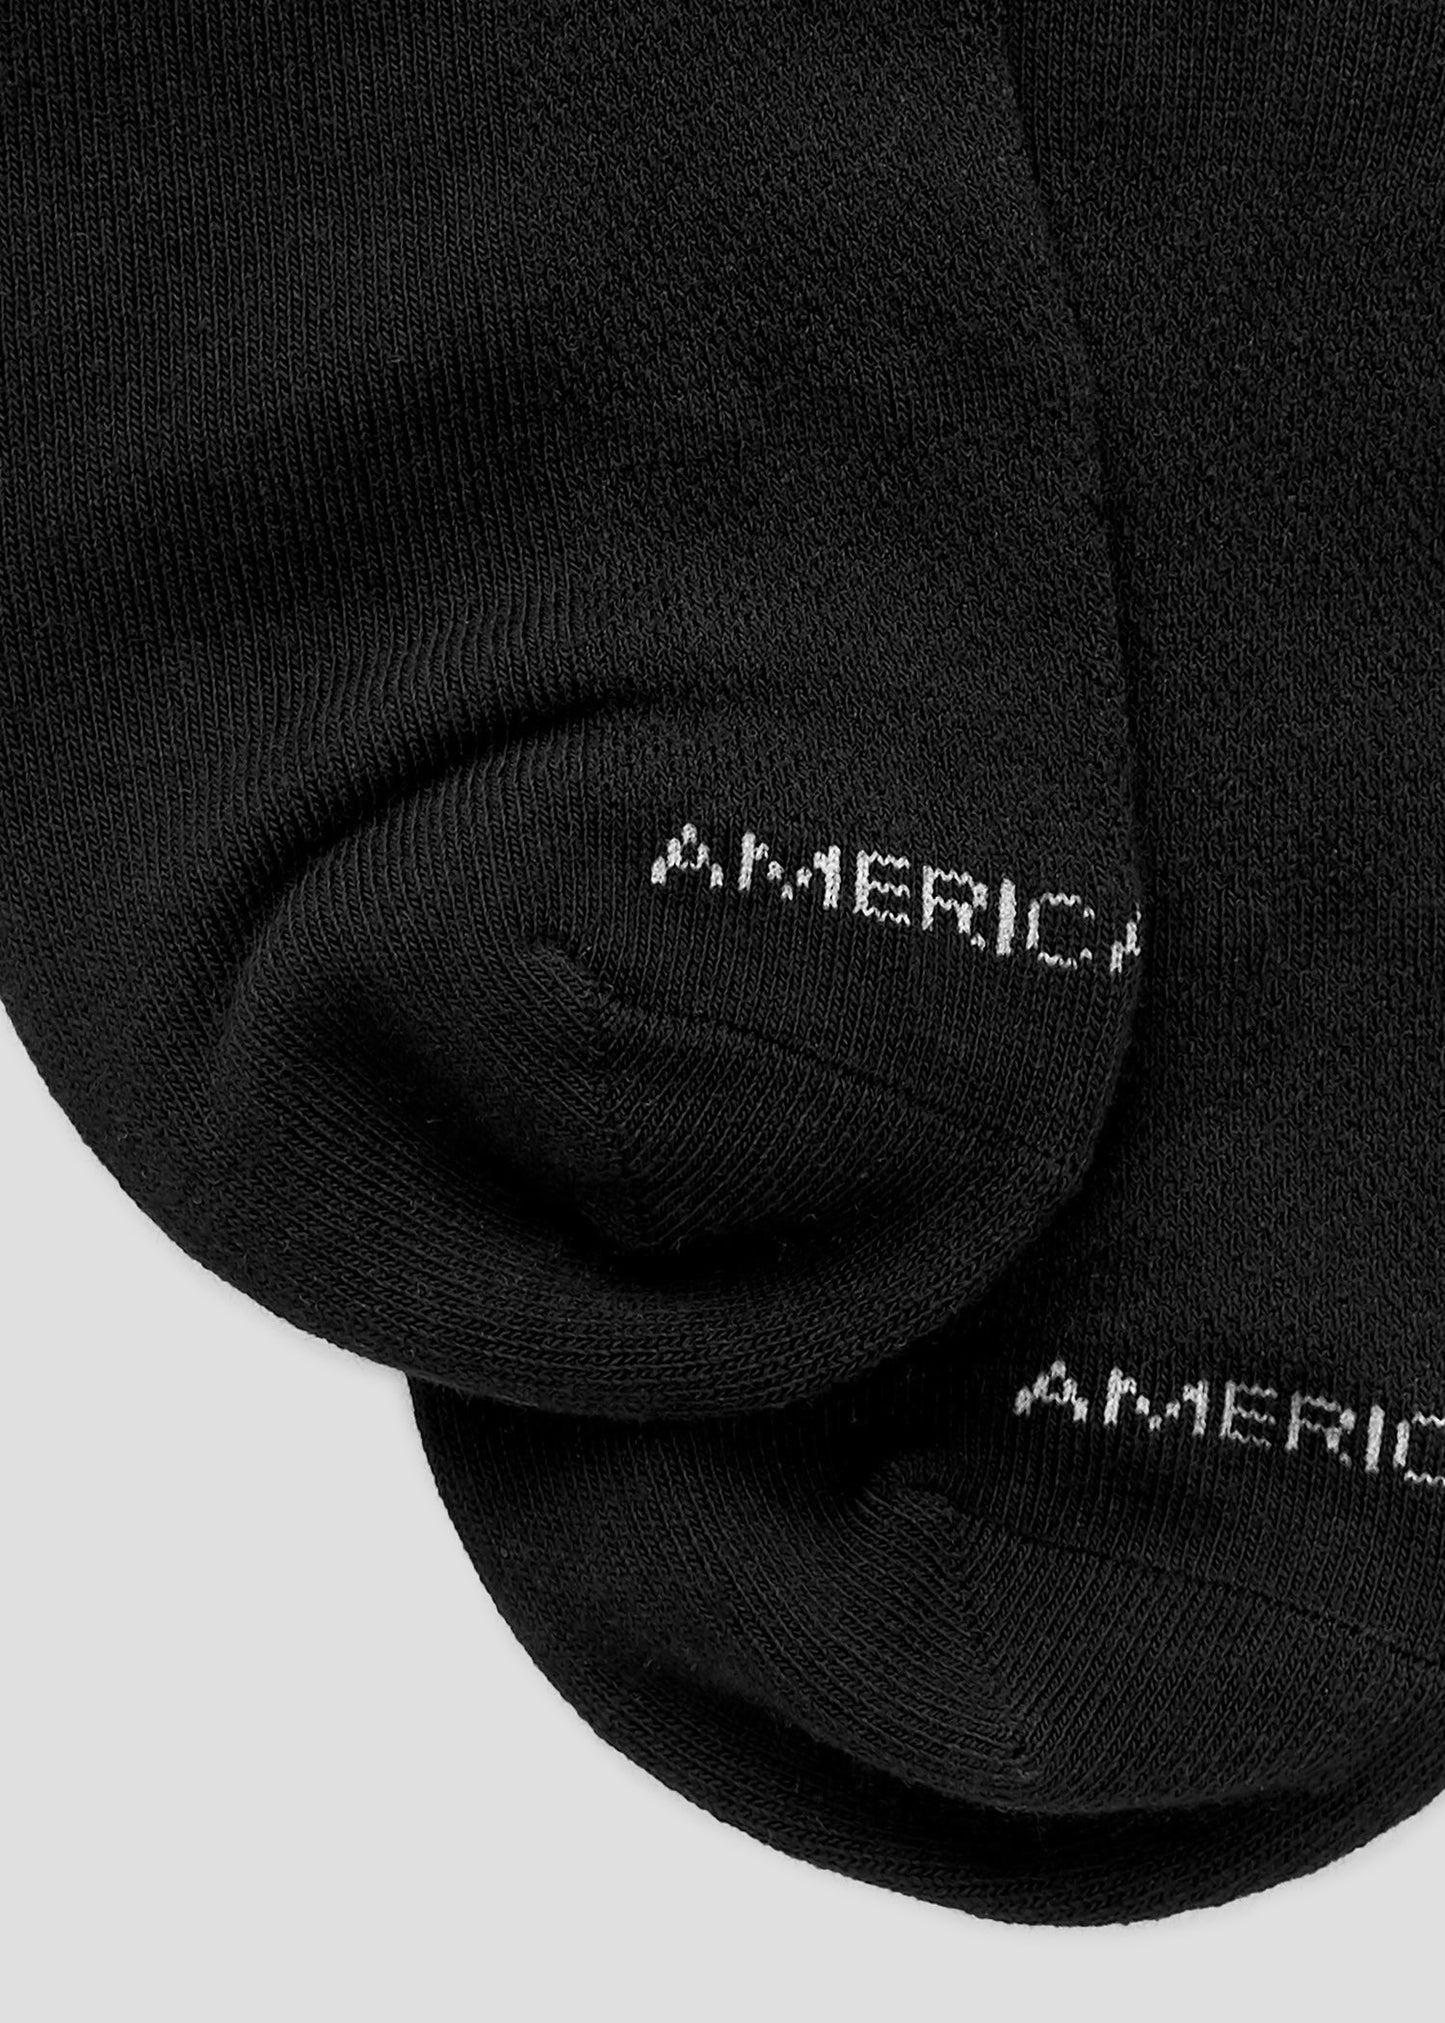    American-Tall-Mens-Athletic-Crew-Socks-X-Large-Size-14-17-Black-3-Pack-Detail